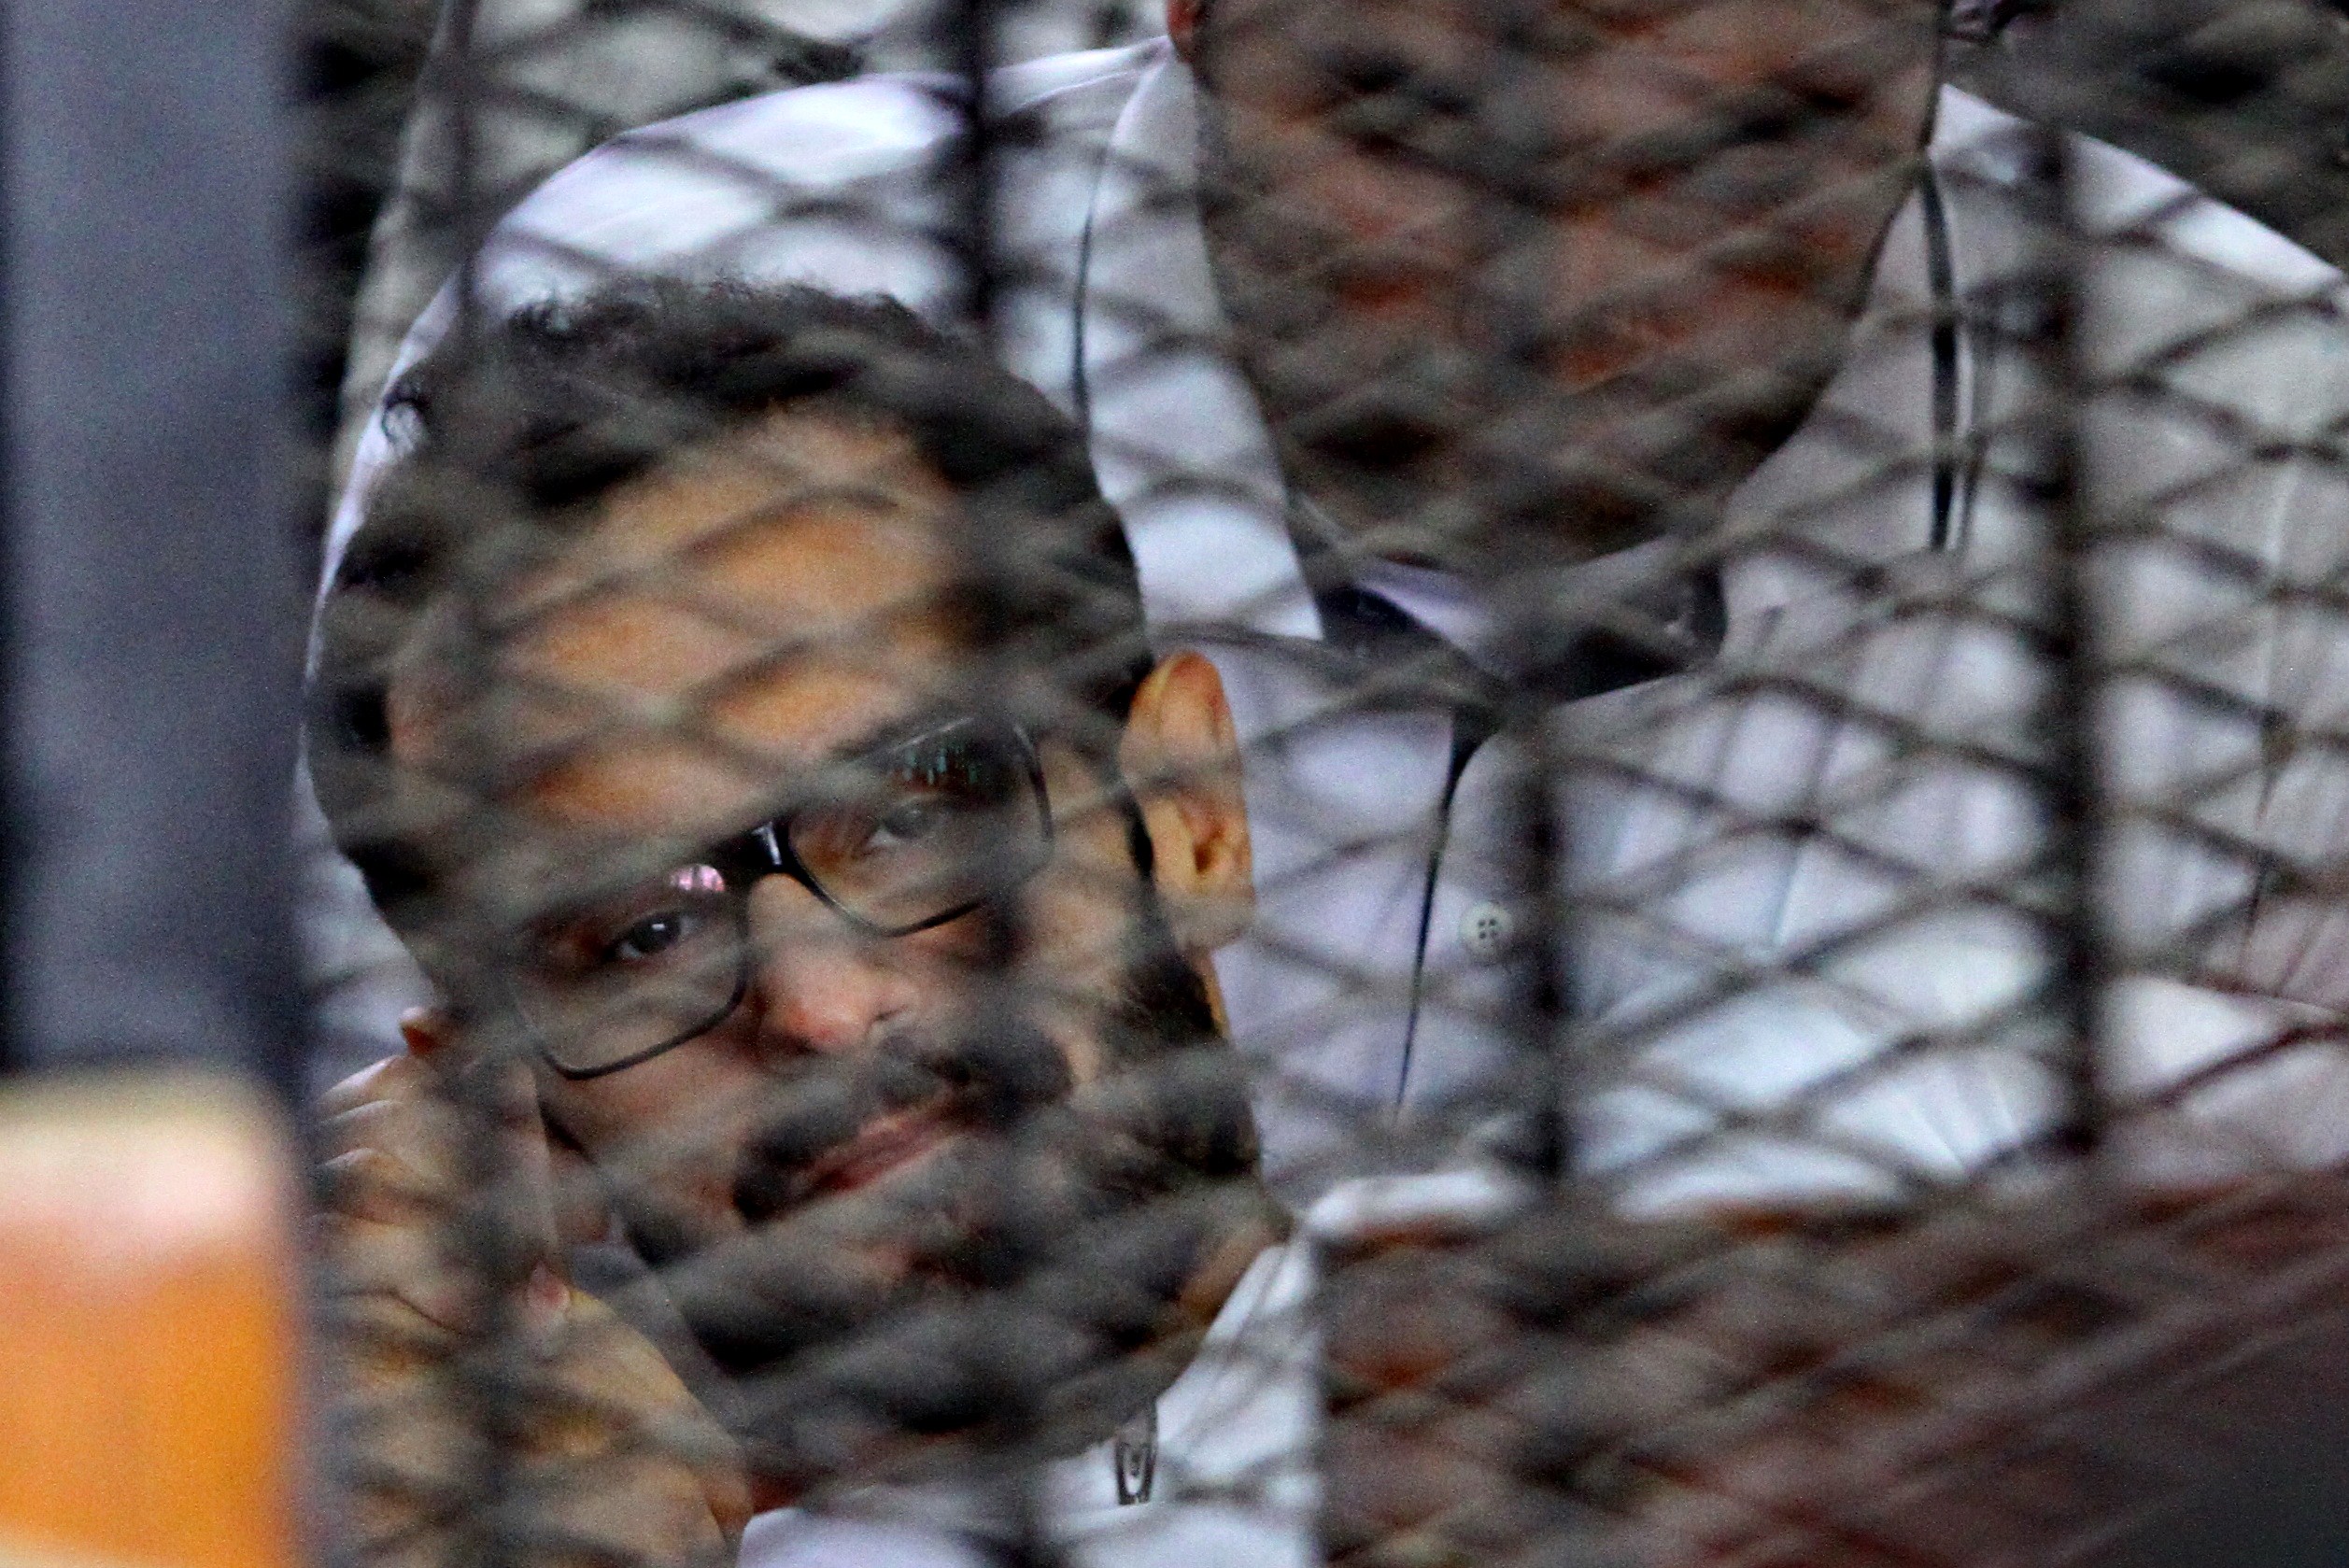 Mohamed Soltan in intensive care for 4th time